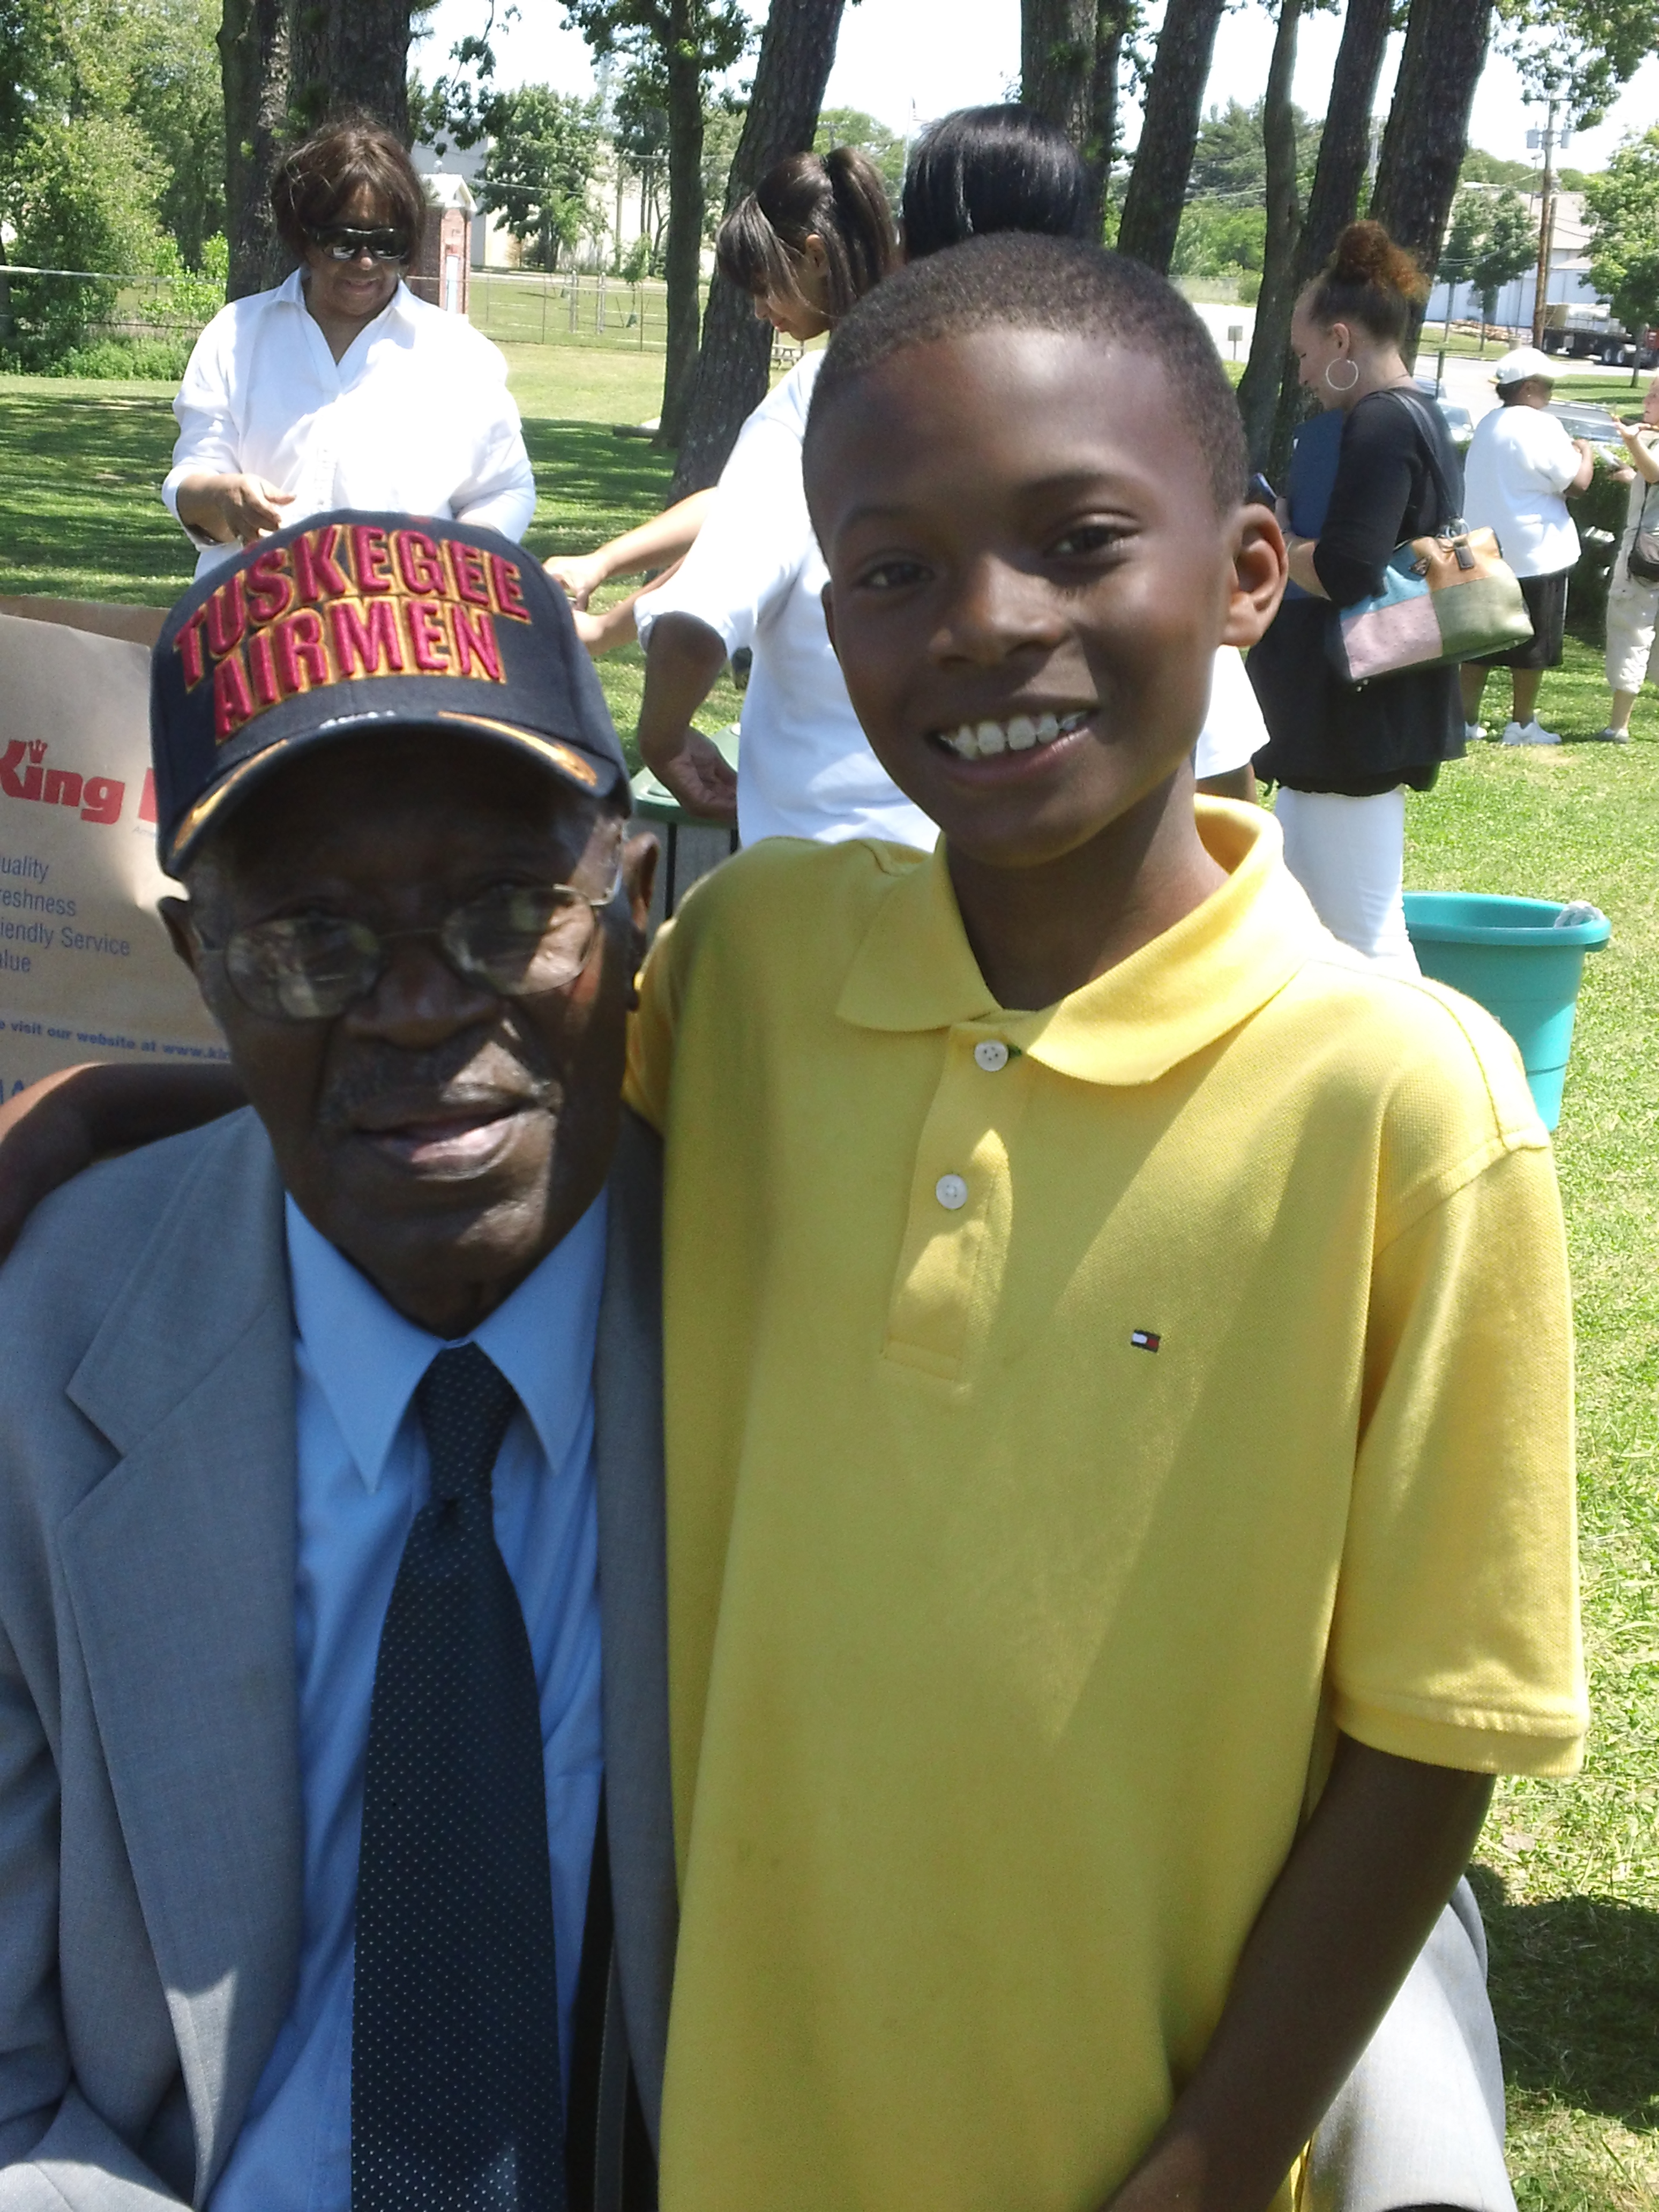 Justice with Lee Hayes, Tuskegee Airman - Juneteenth Celebration